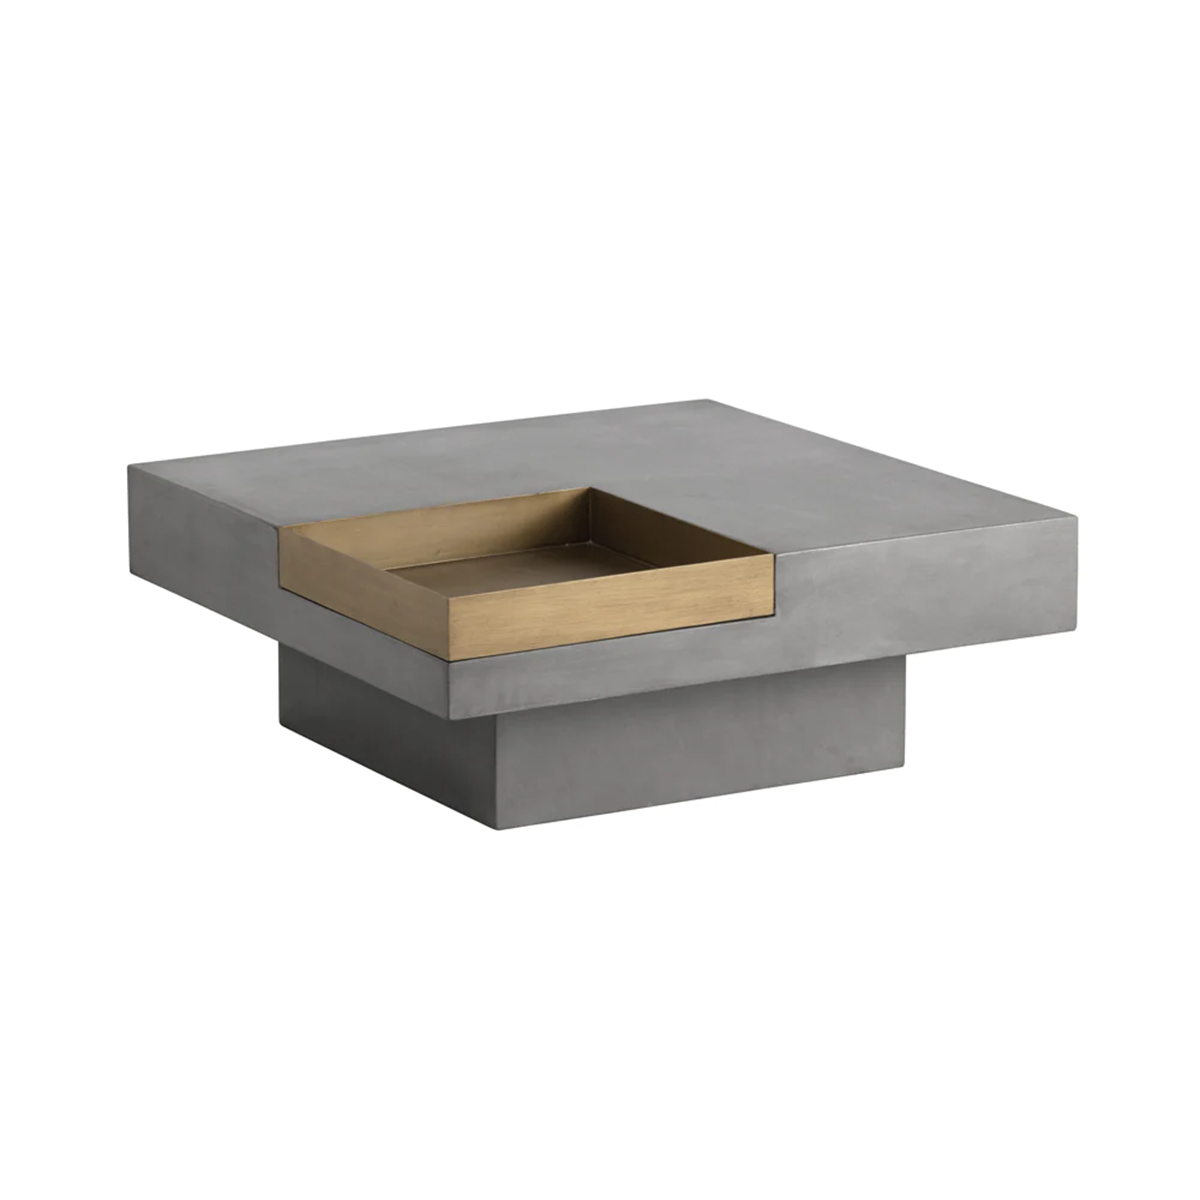 Quill Square Coffee Table by Sunpan Square with a White Background